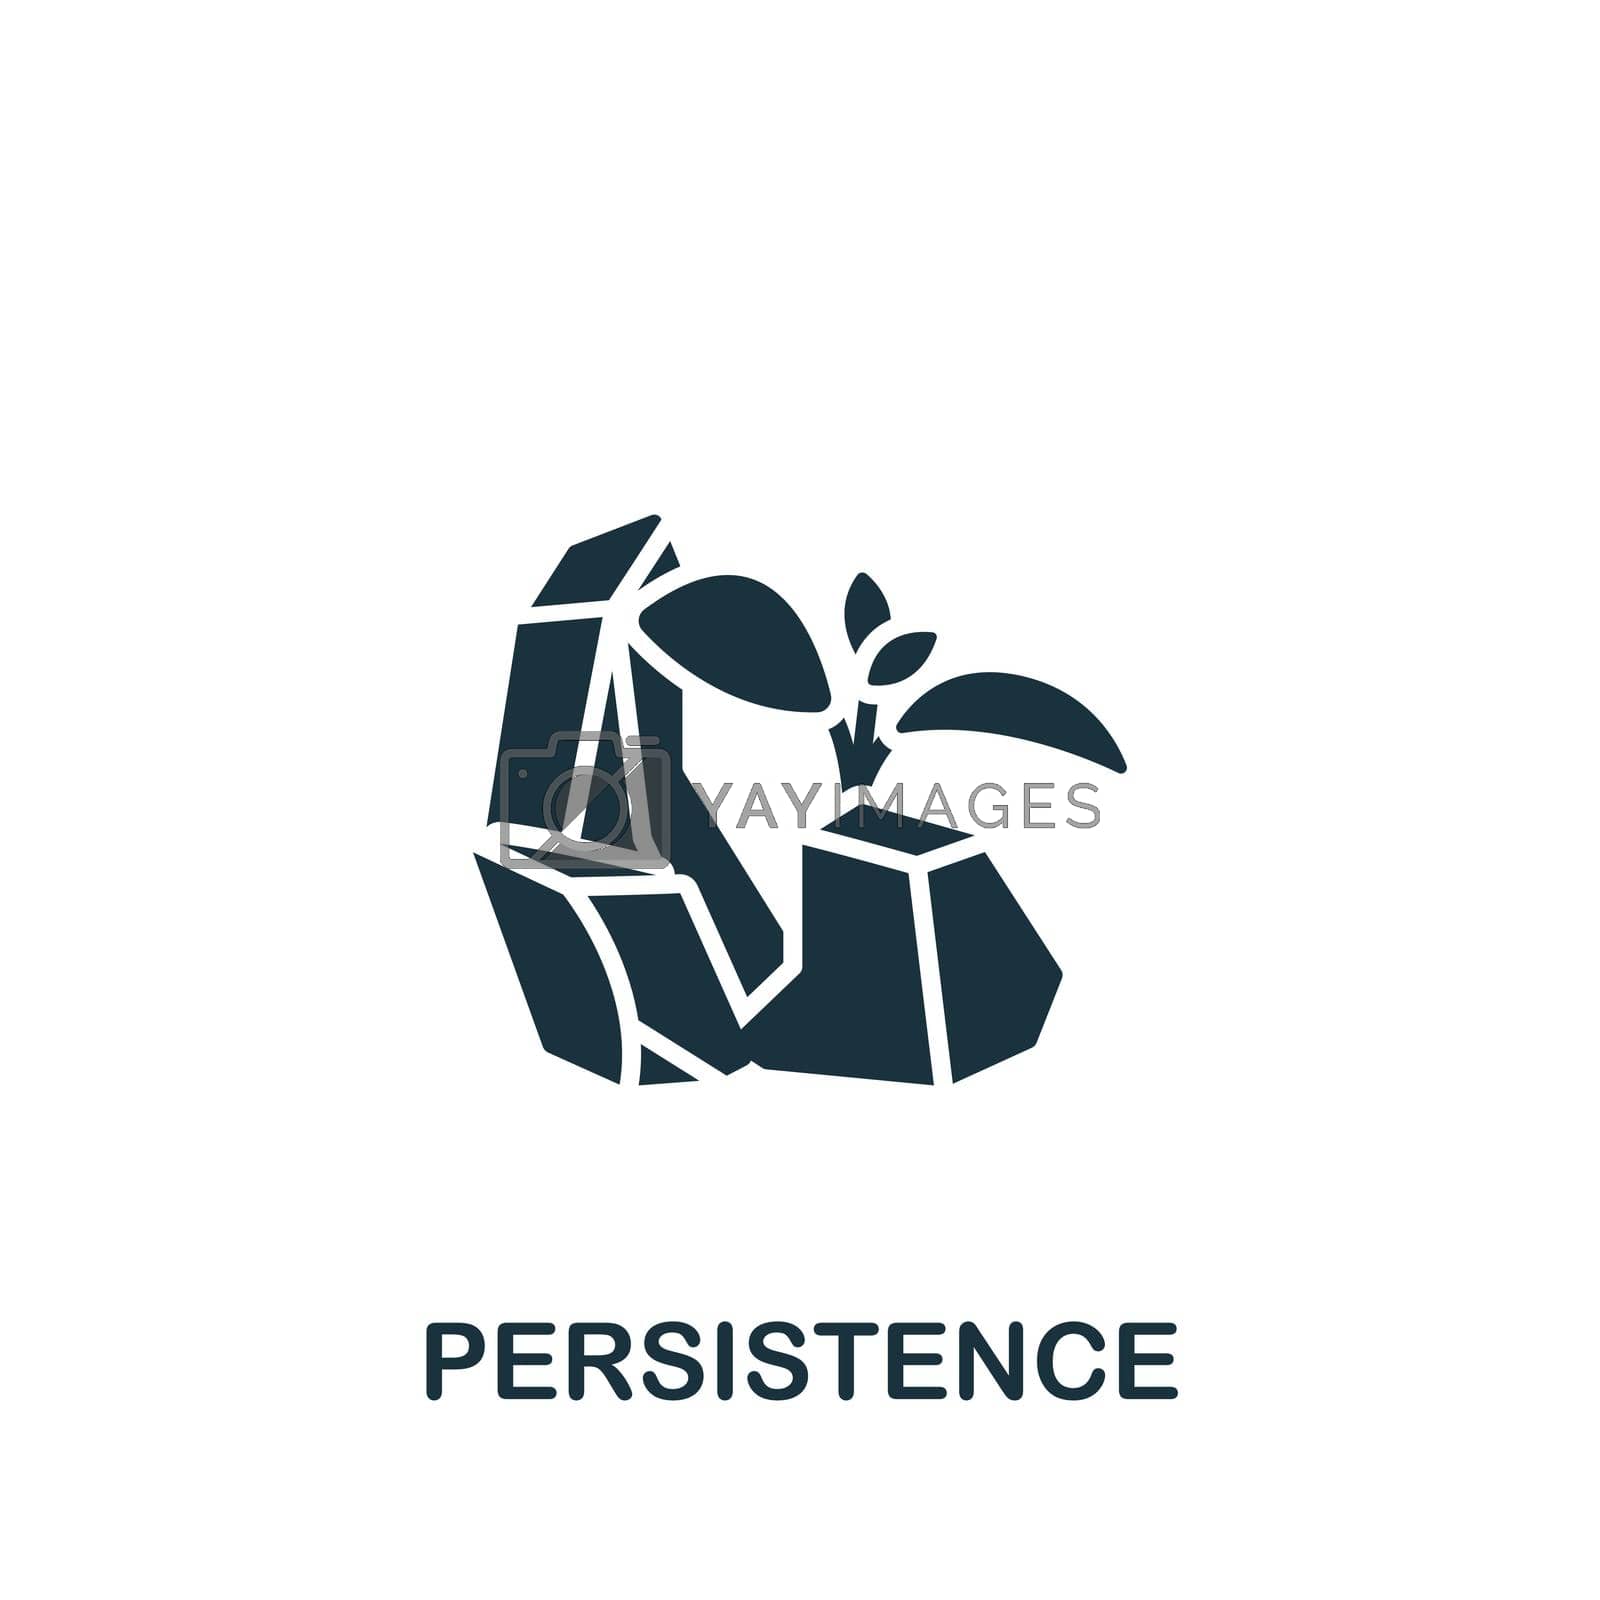 Royalty free image of Persistence icon. Monochrome simple Business Motivation icon for templates, web design and infographics by simakovavector